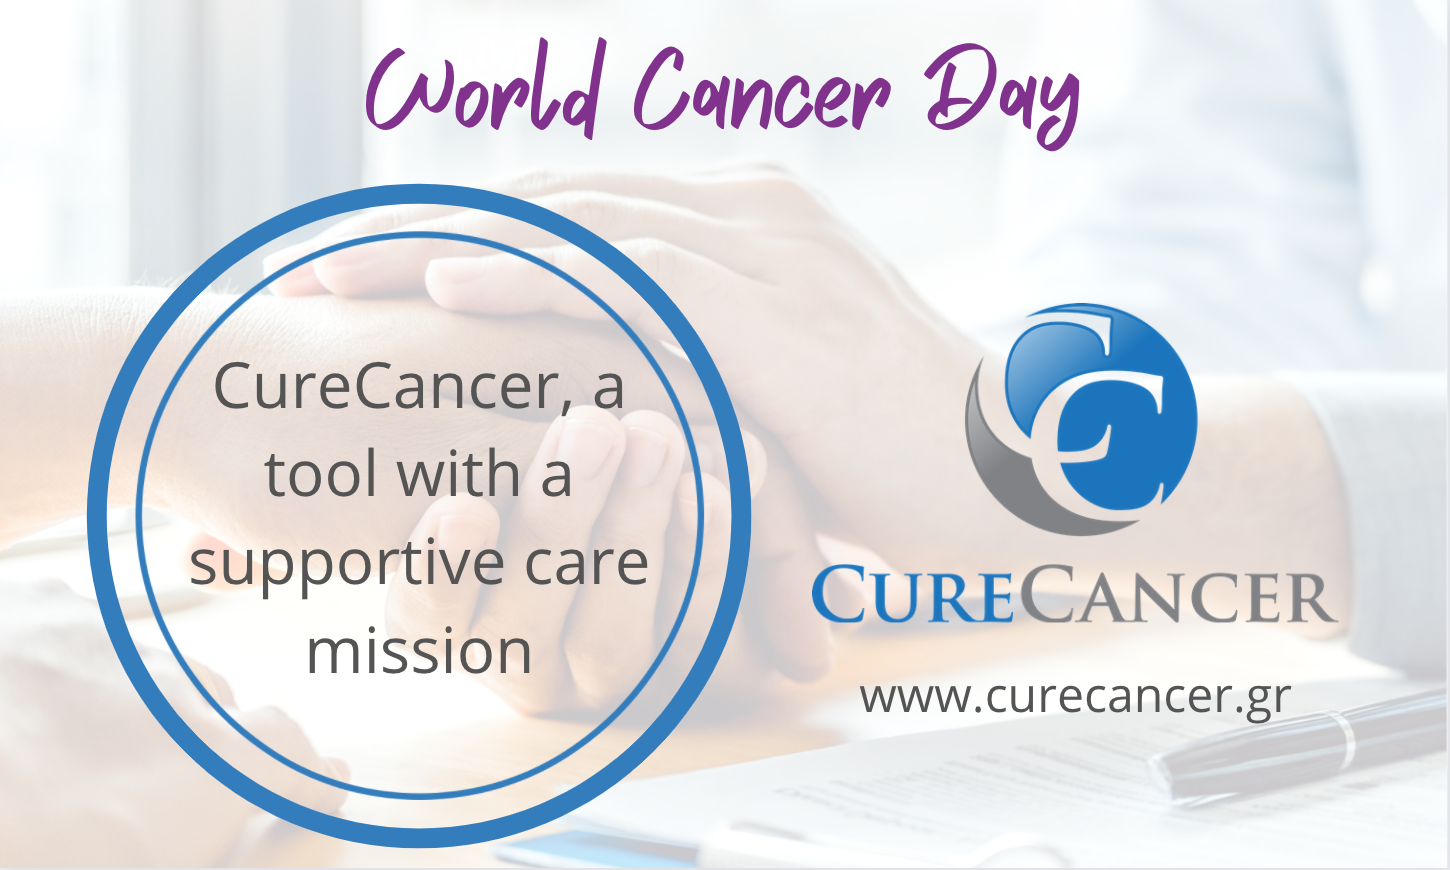 CureCancer - mycancer.gr, a tool with a supportive care mission - Παγκόσμια Ημέρα κατα του καρκίνου